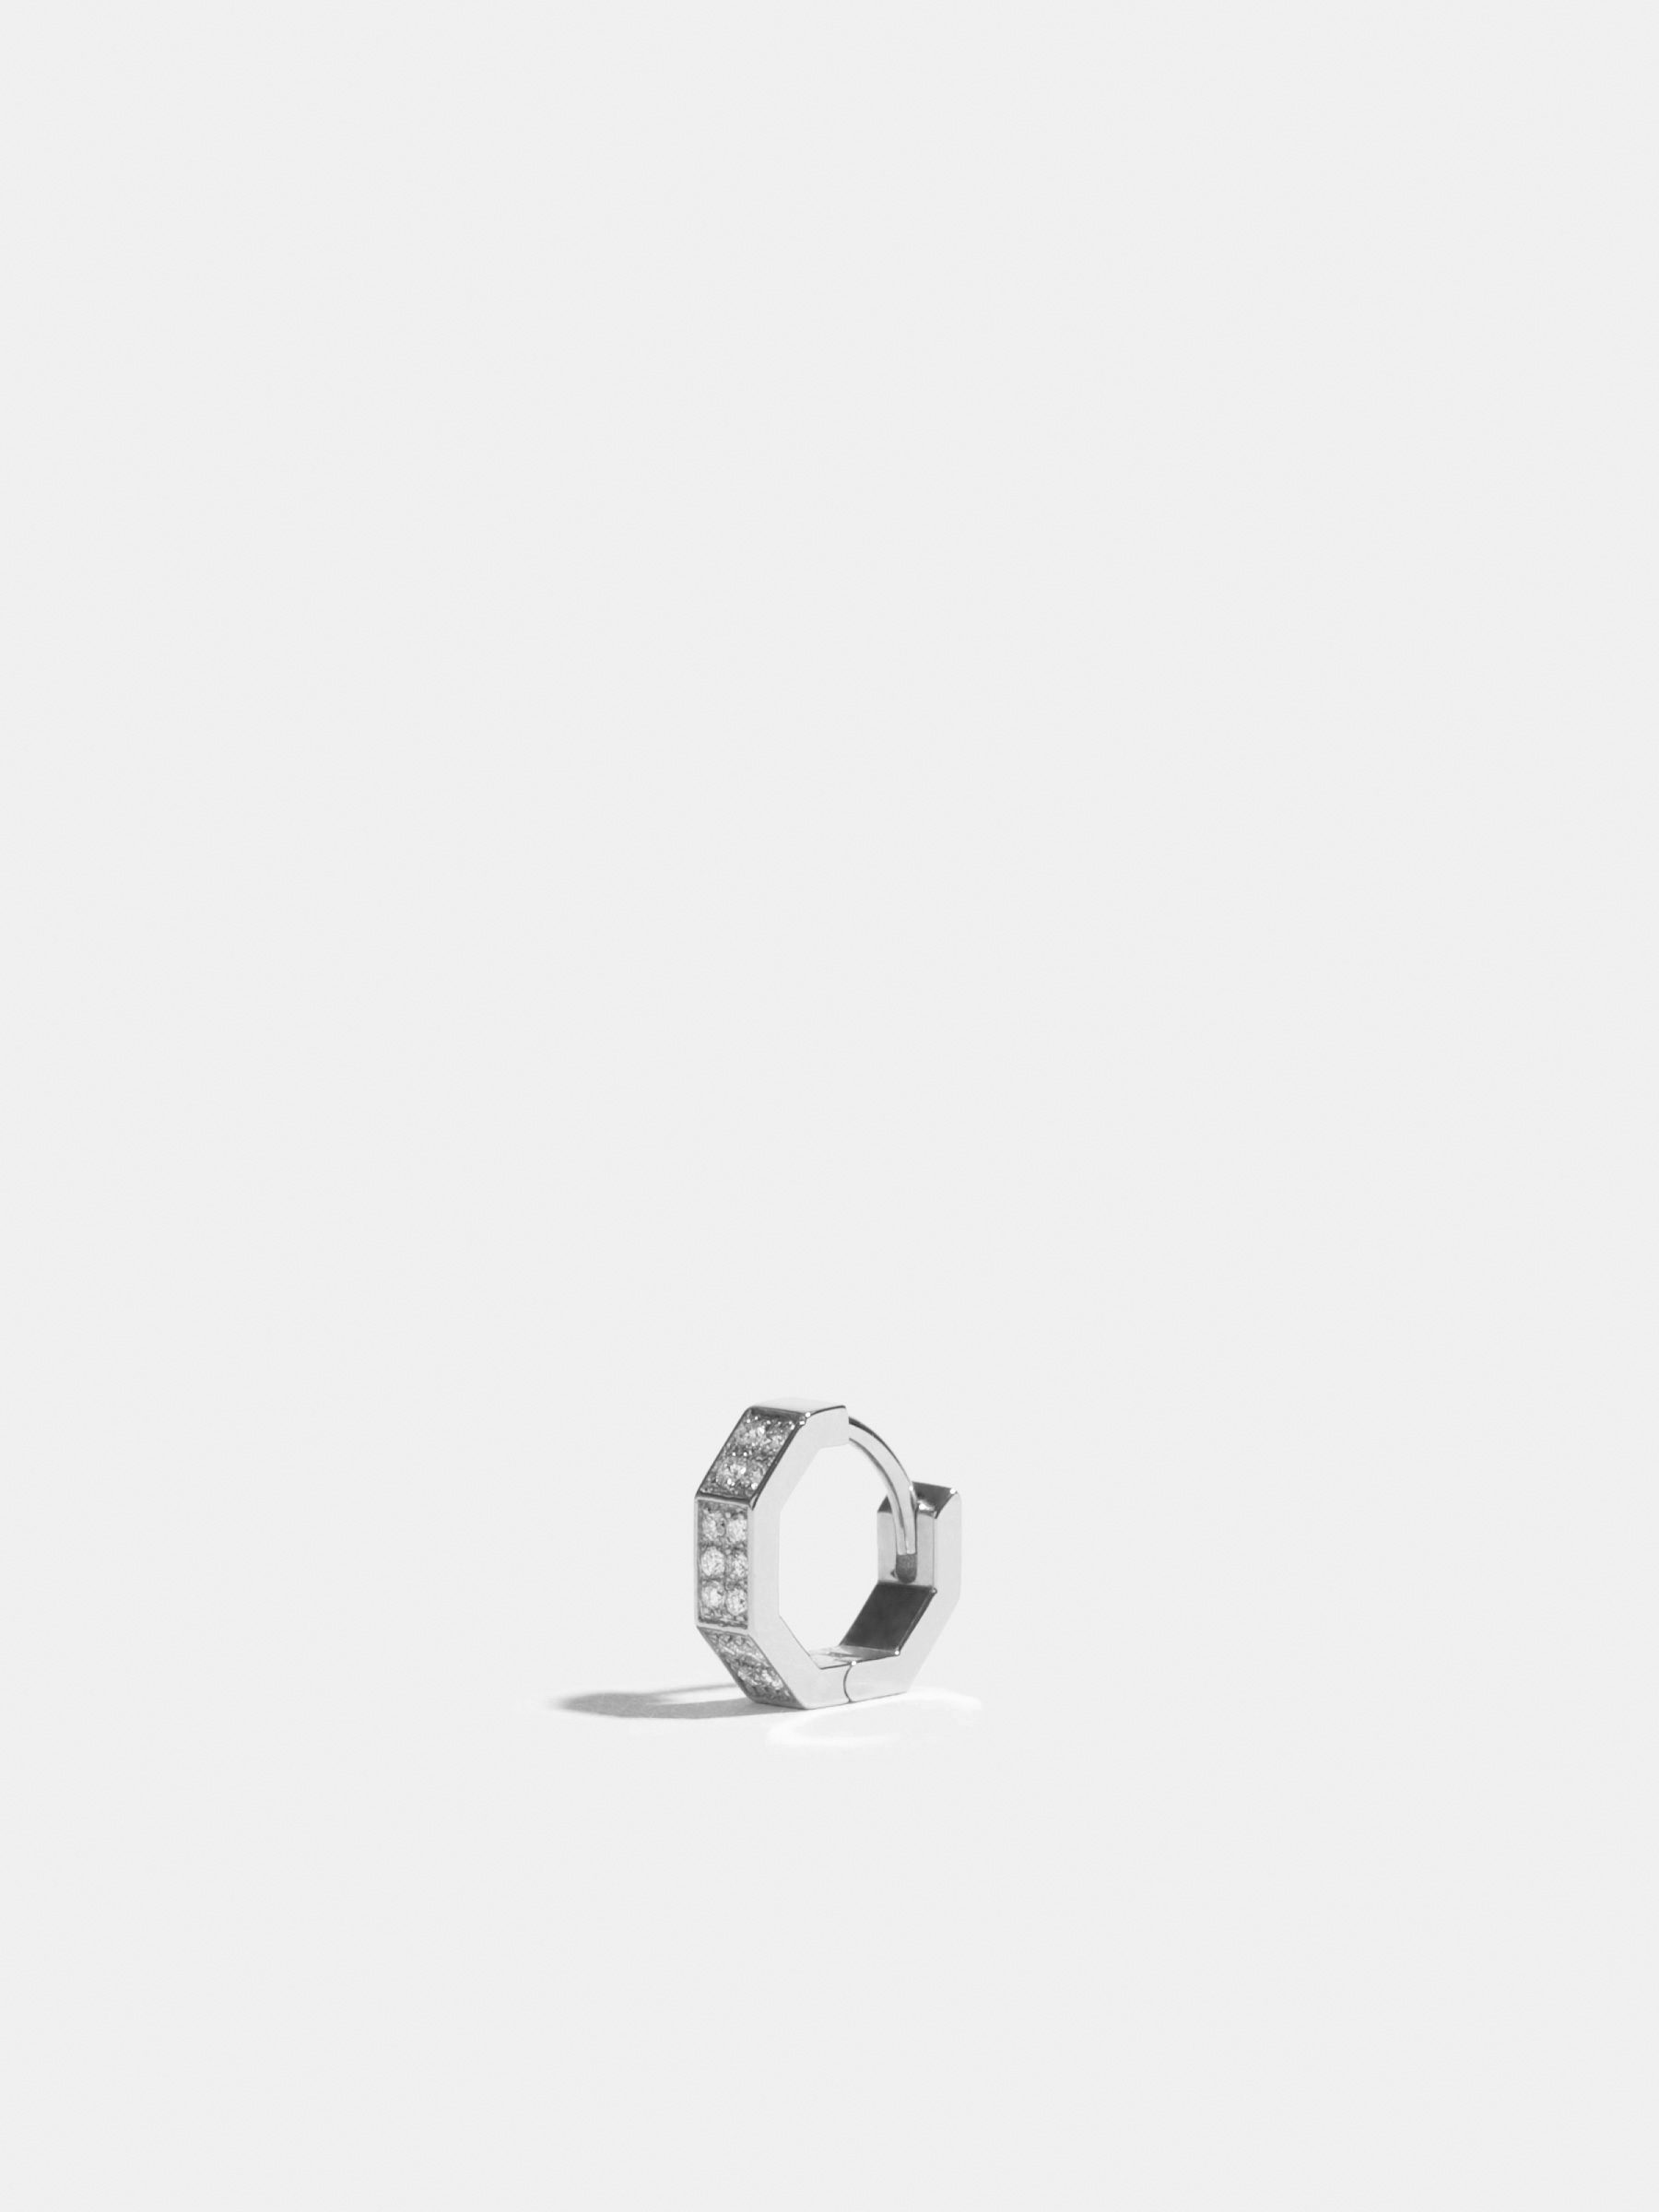 Octogone single-loop in 18k Fairmined ethical white gold, paved with lab-grown diamonds, the unity.